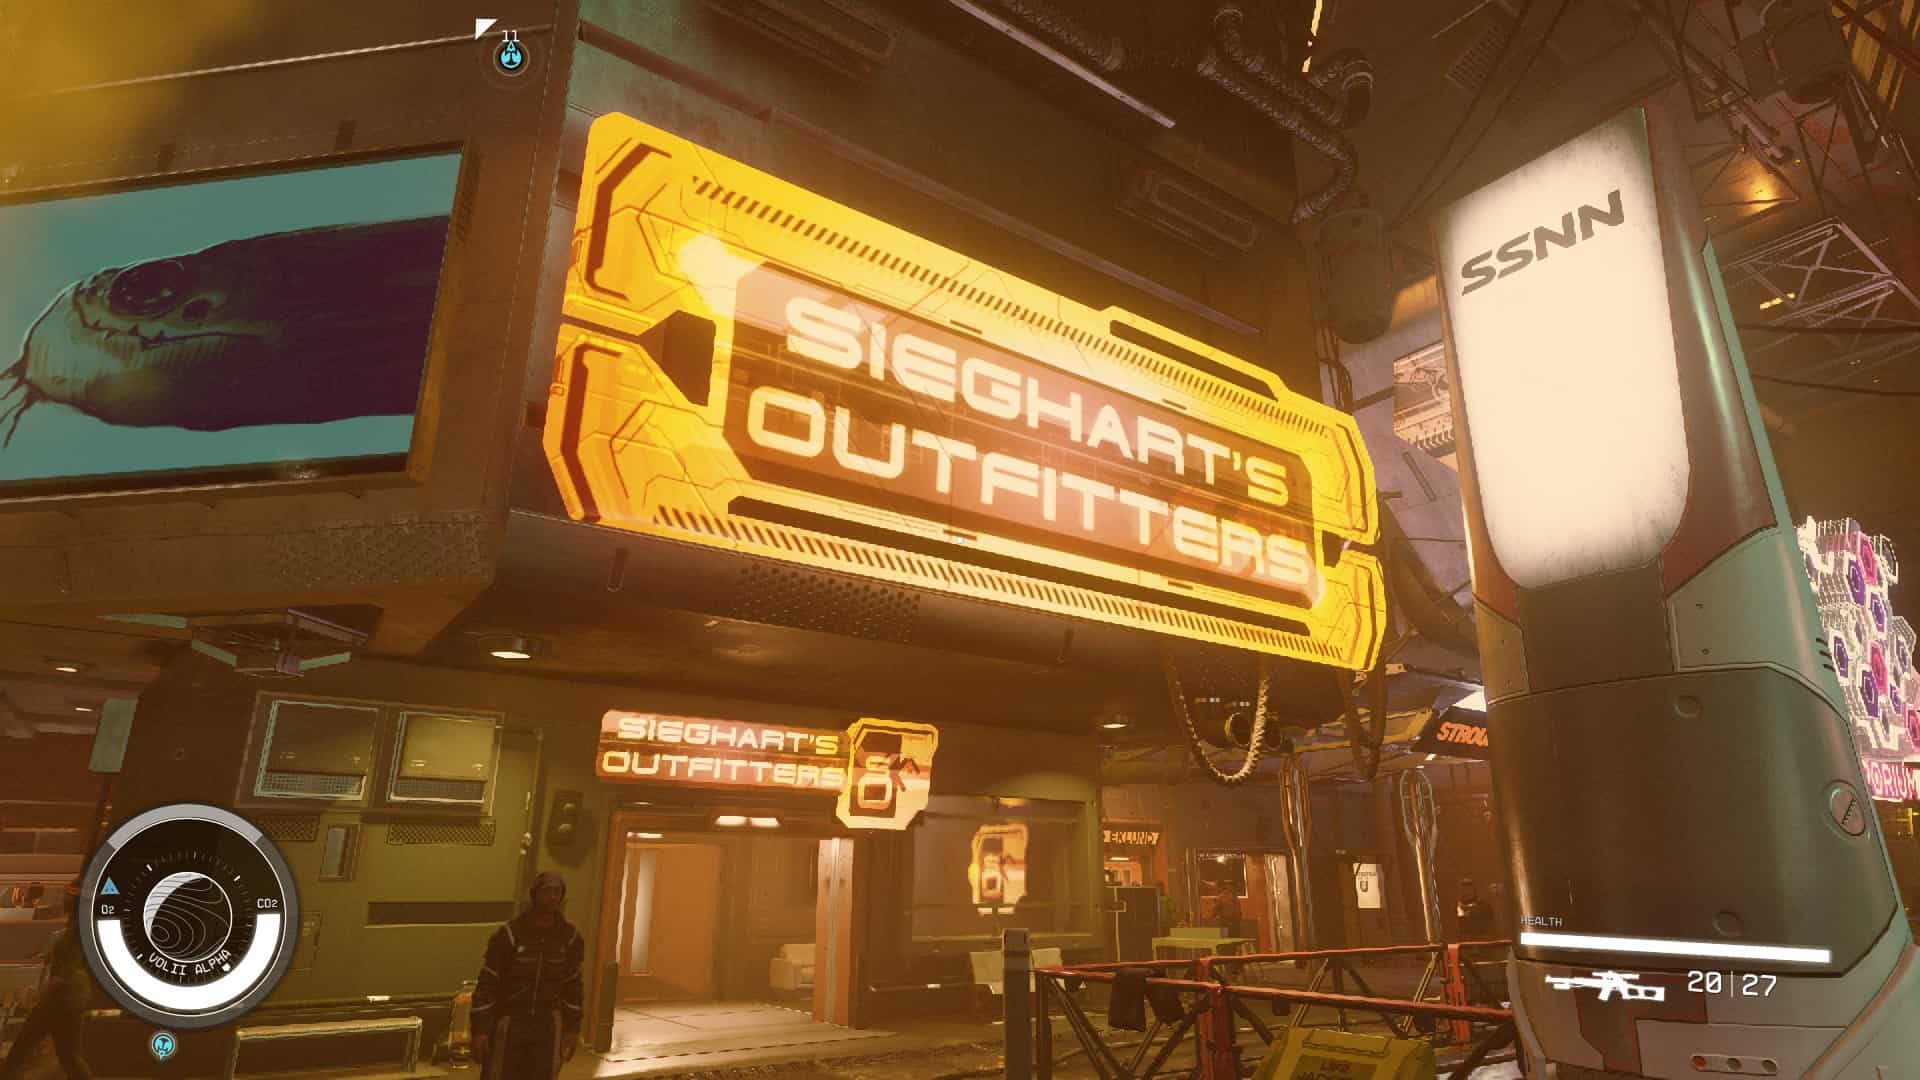 Starfield Microsecond Regulator: The outside of Sieghart's Outfitters in Neon.